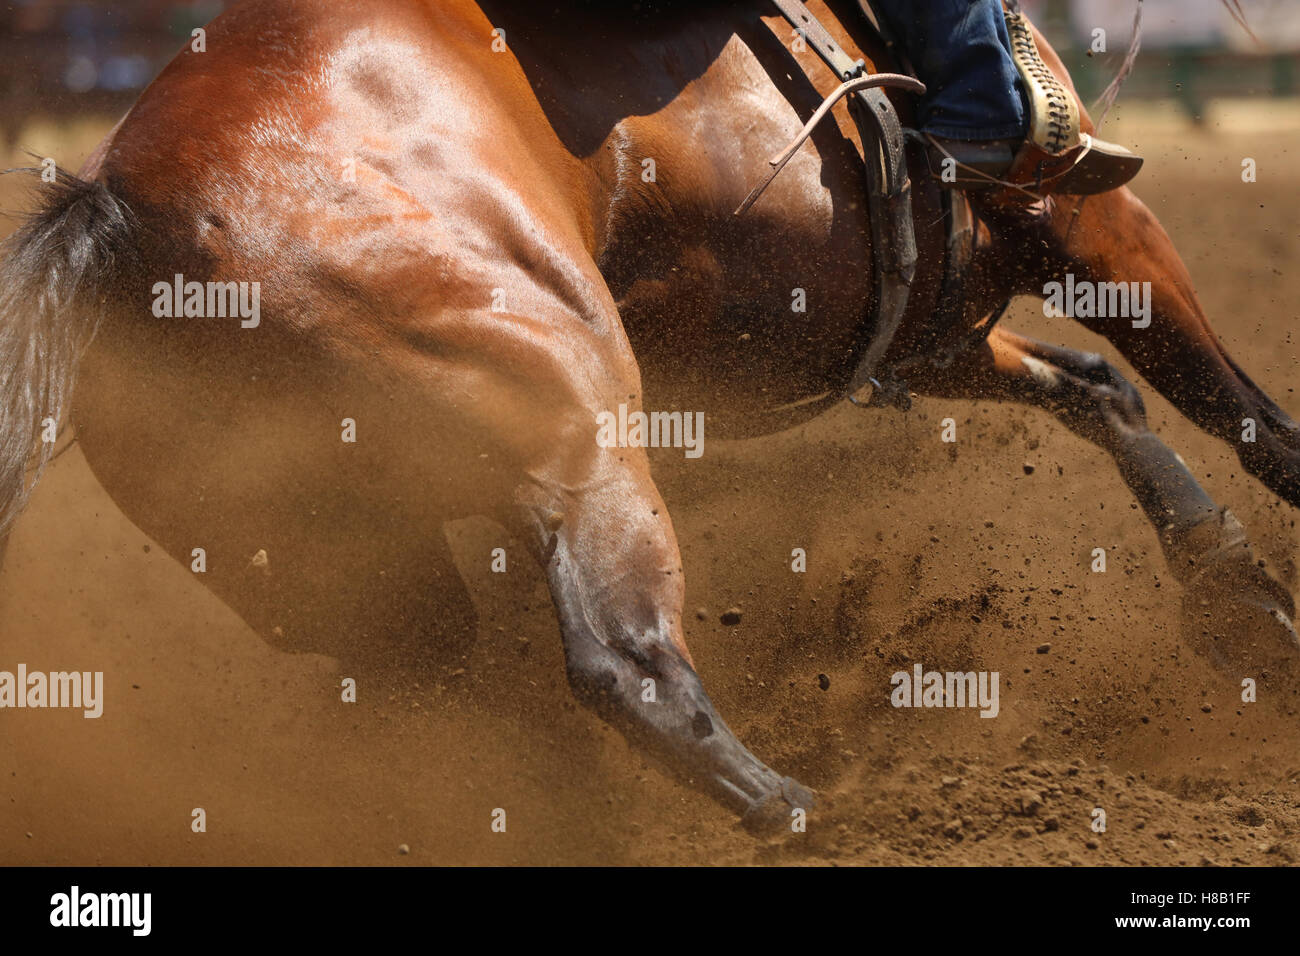 A close up view of the hip, muscles and fur of a barrel racing horse with dirt flying everywhere. Stock Photo